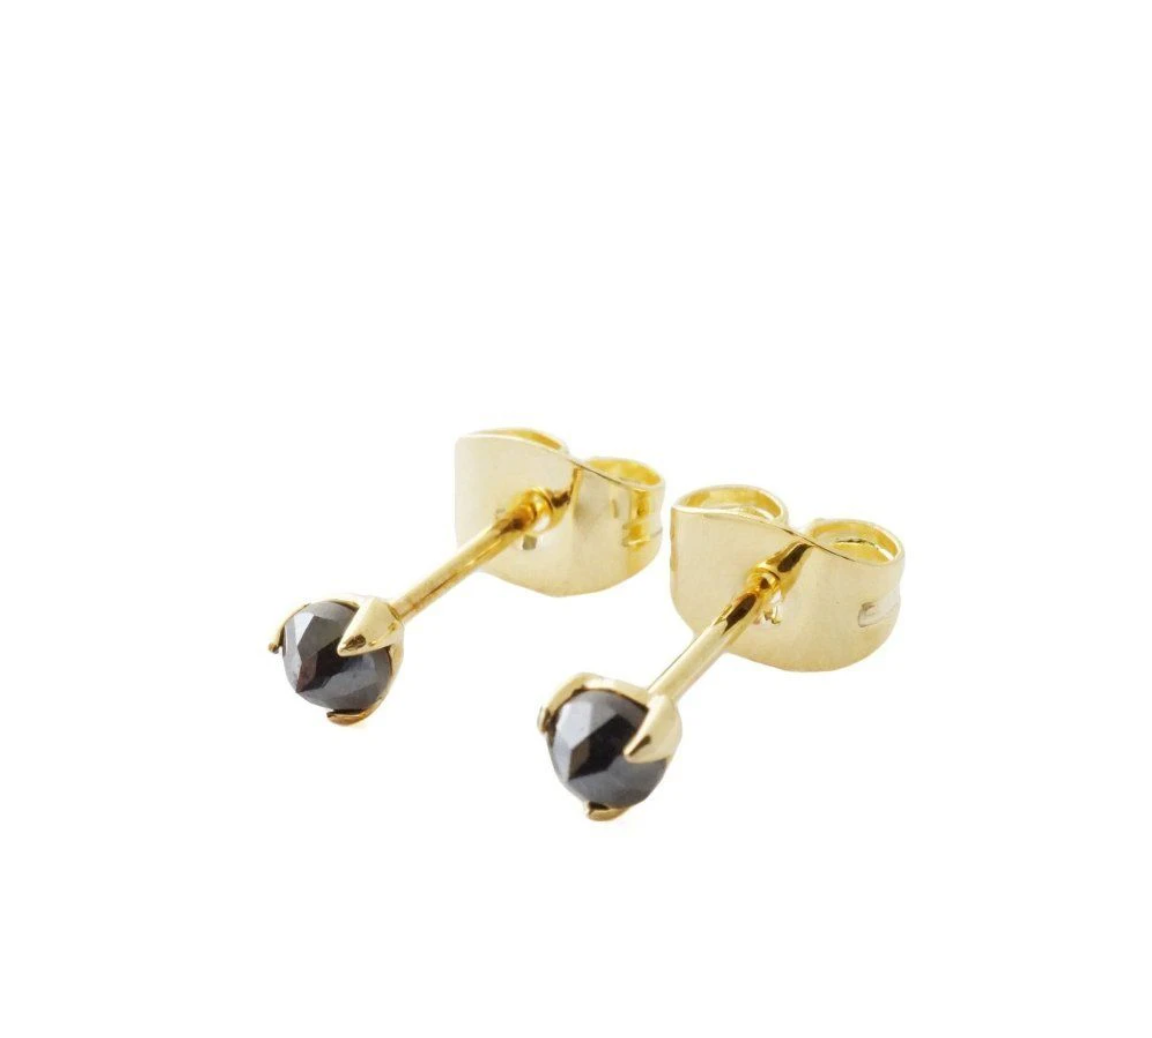 Gold Iron Ore Solitaire Stud Earrings